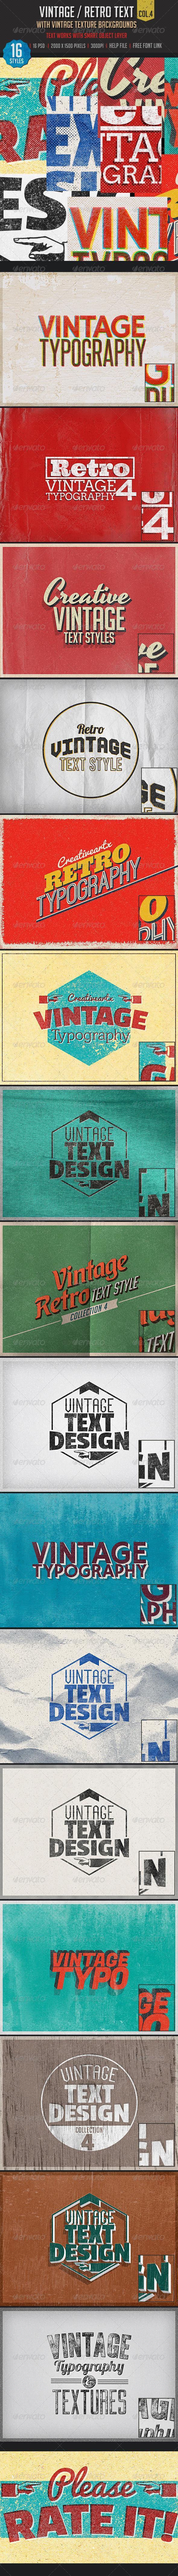 Vintage Typography in Photoshop